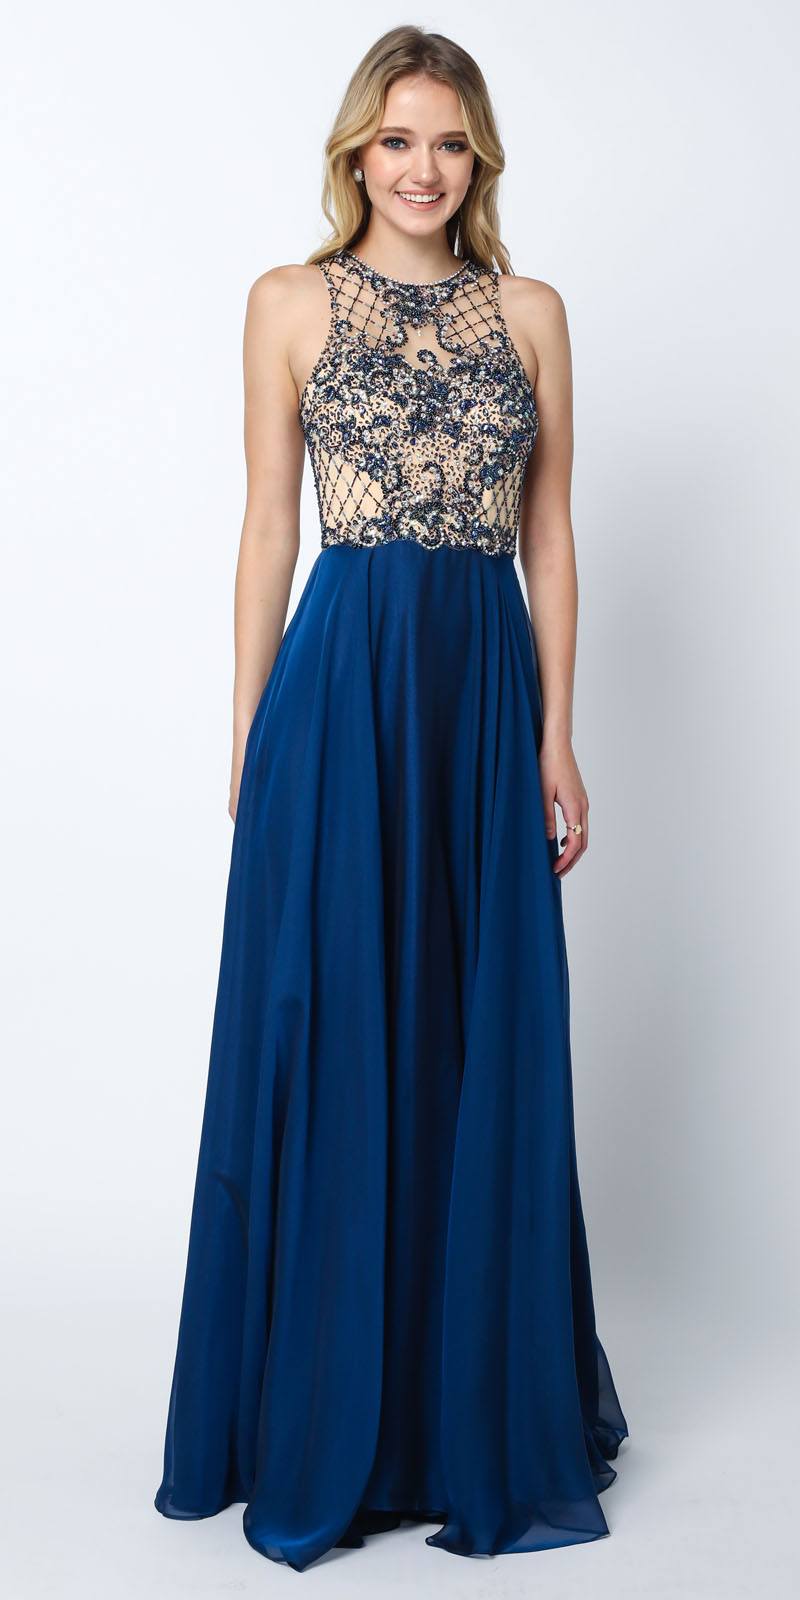 Juliet 637 Sleeveless A-Line Rhinestone Embellished Prom Gown Navy Blue